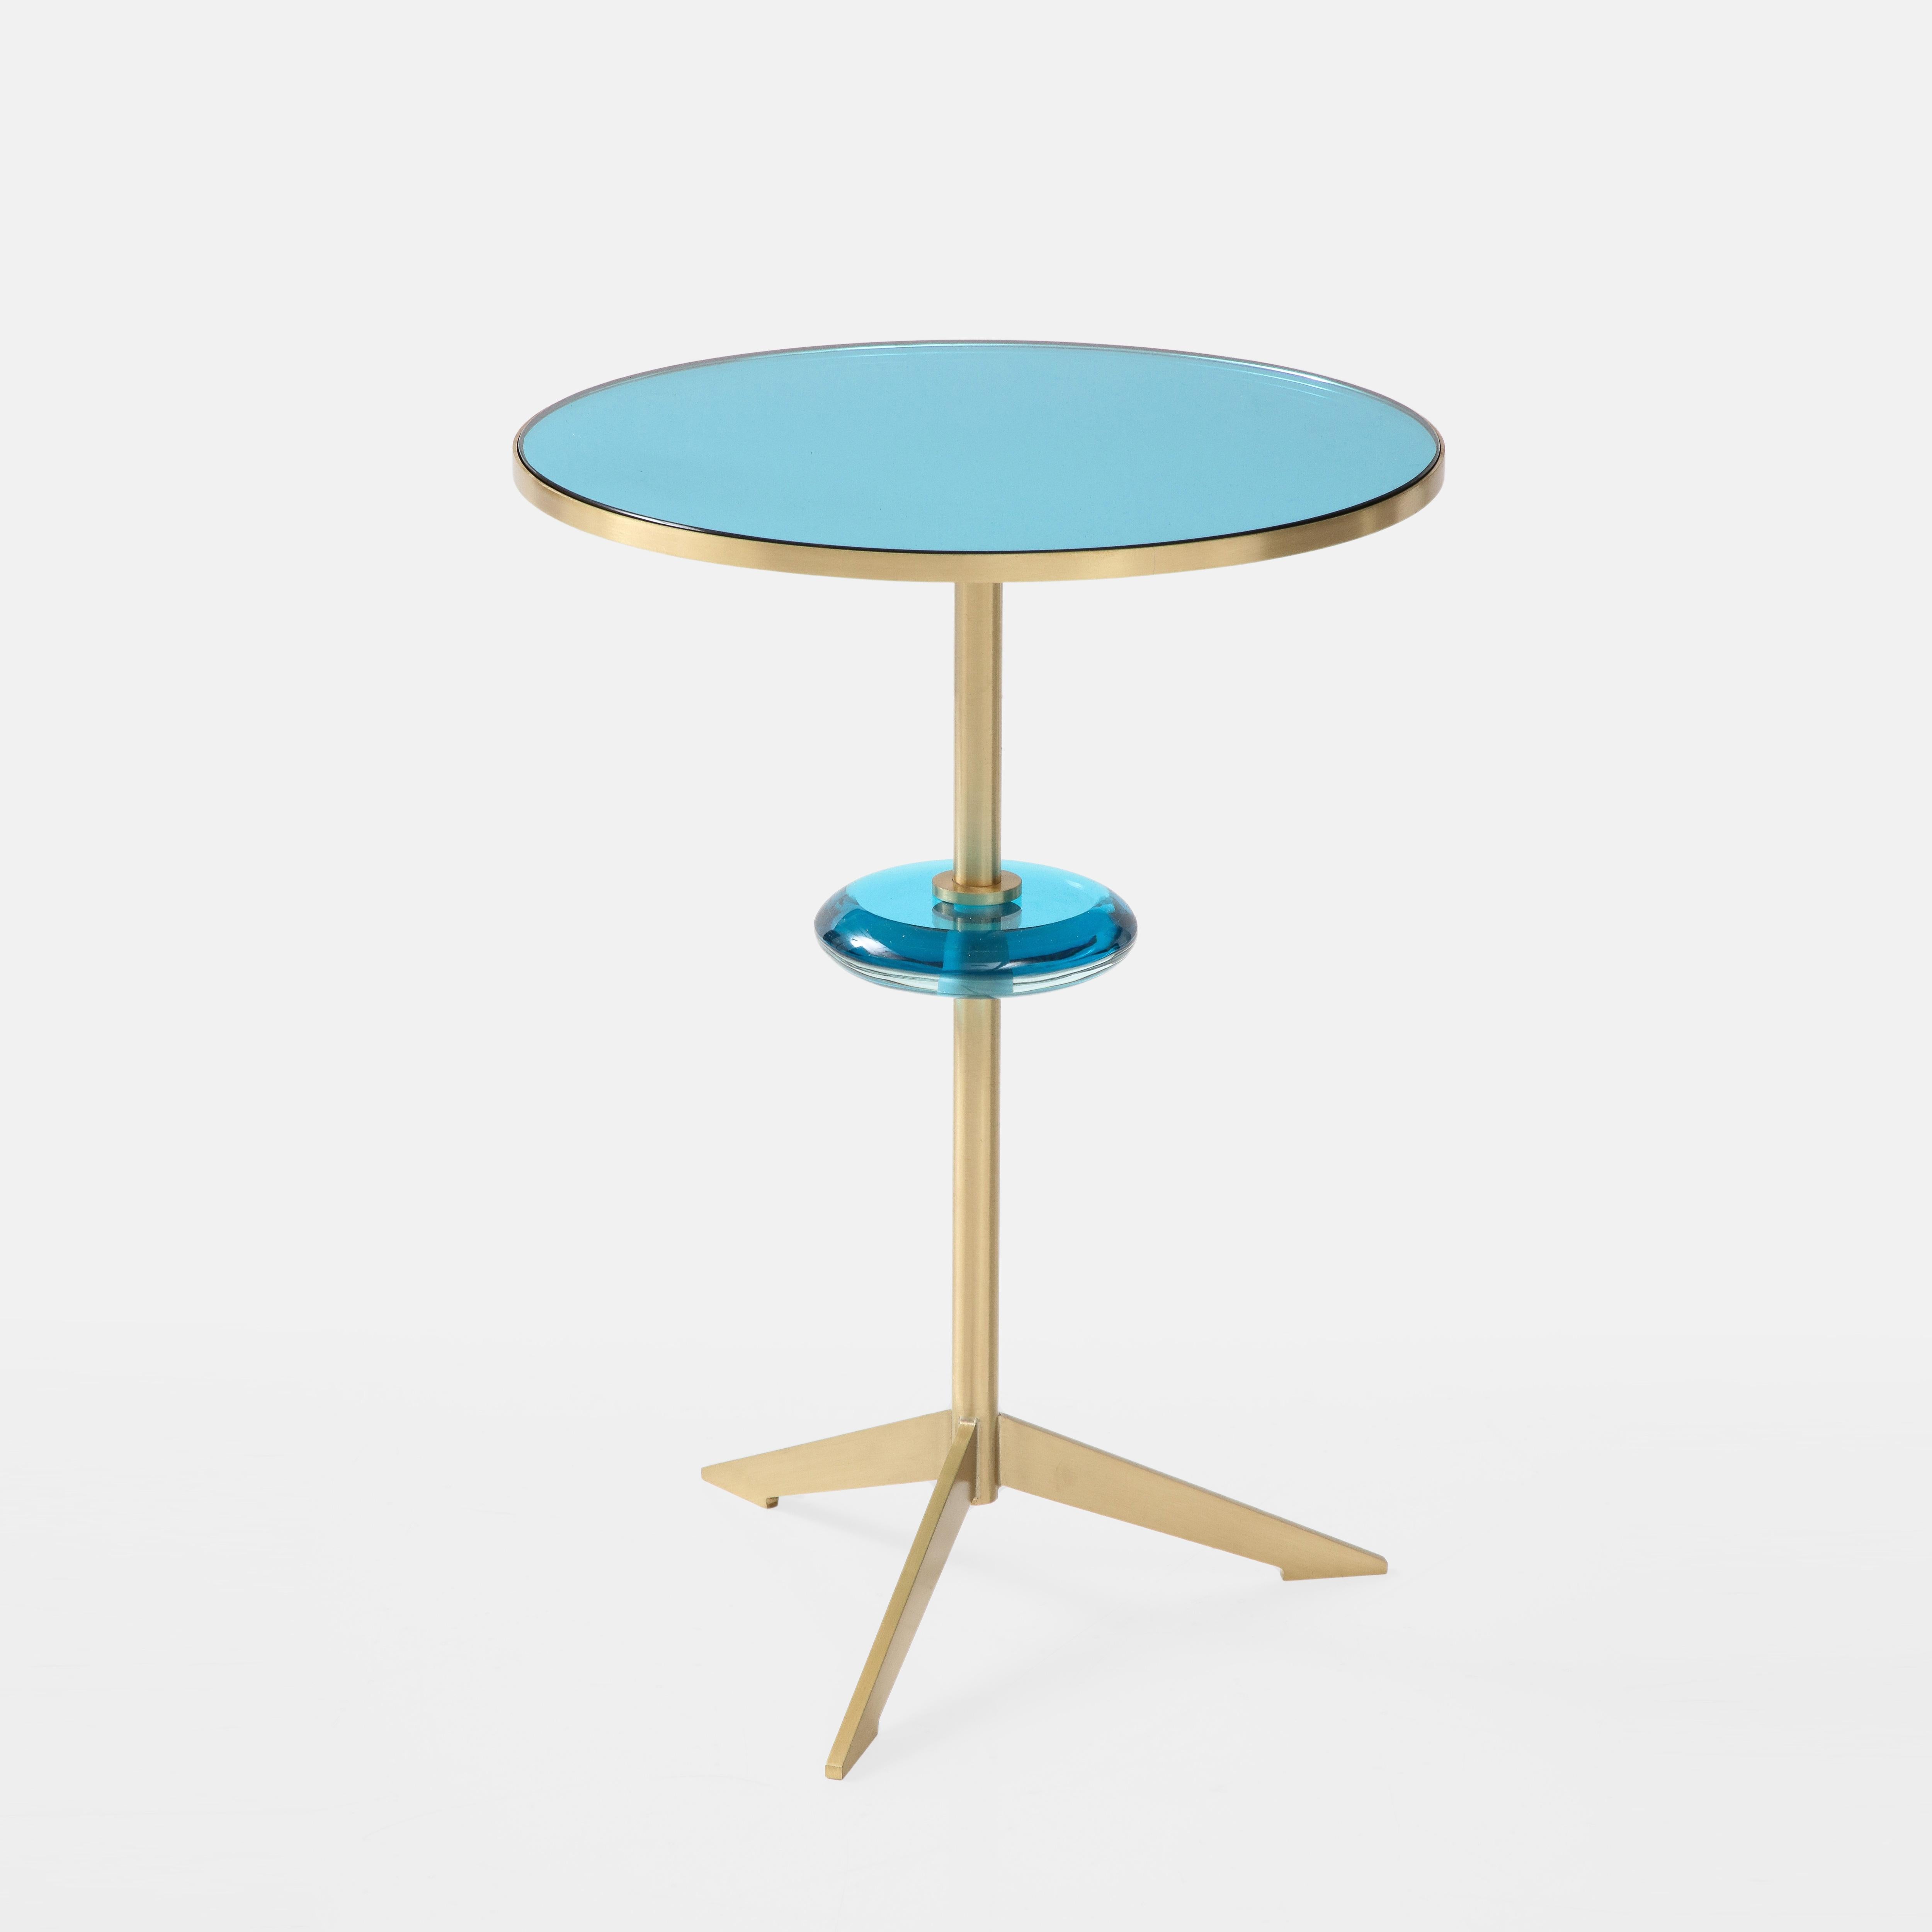 Effetto Vetro exquisite custom contemporary round side table with mirrored colored glass top inset on satin brass tripod base with floating colored glass orb suspended on brass stem. This lovely modernist sculptural side table (or pair) is currently